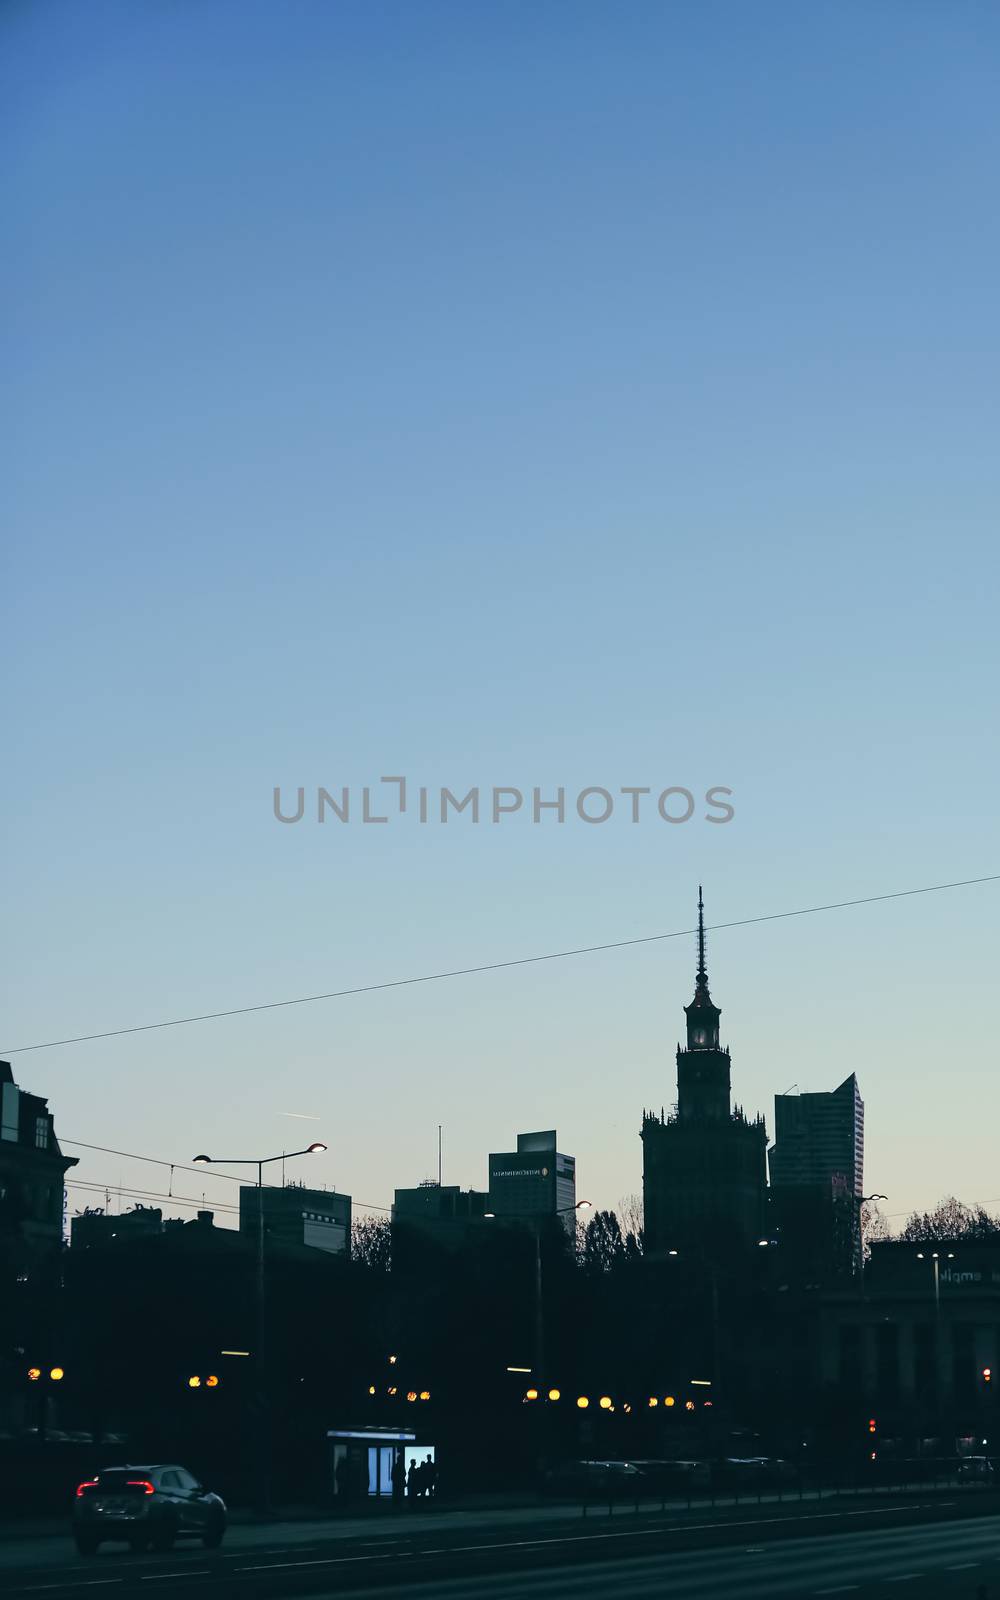 Cityscape silhouette of a European city as background, evening view by Anneleven